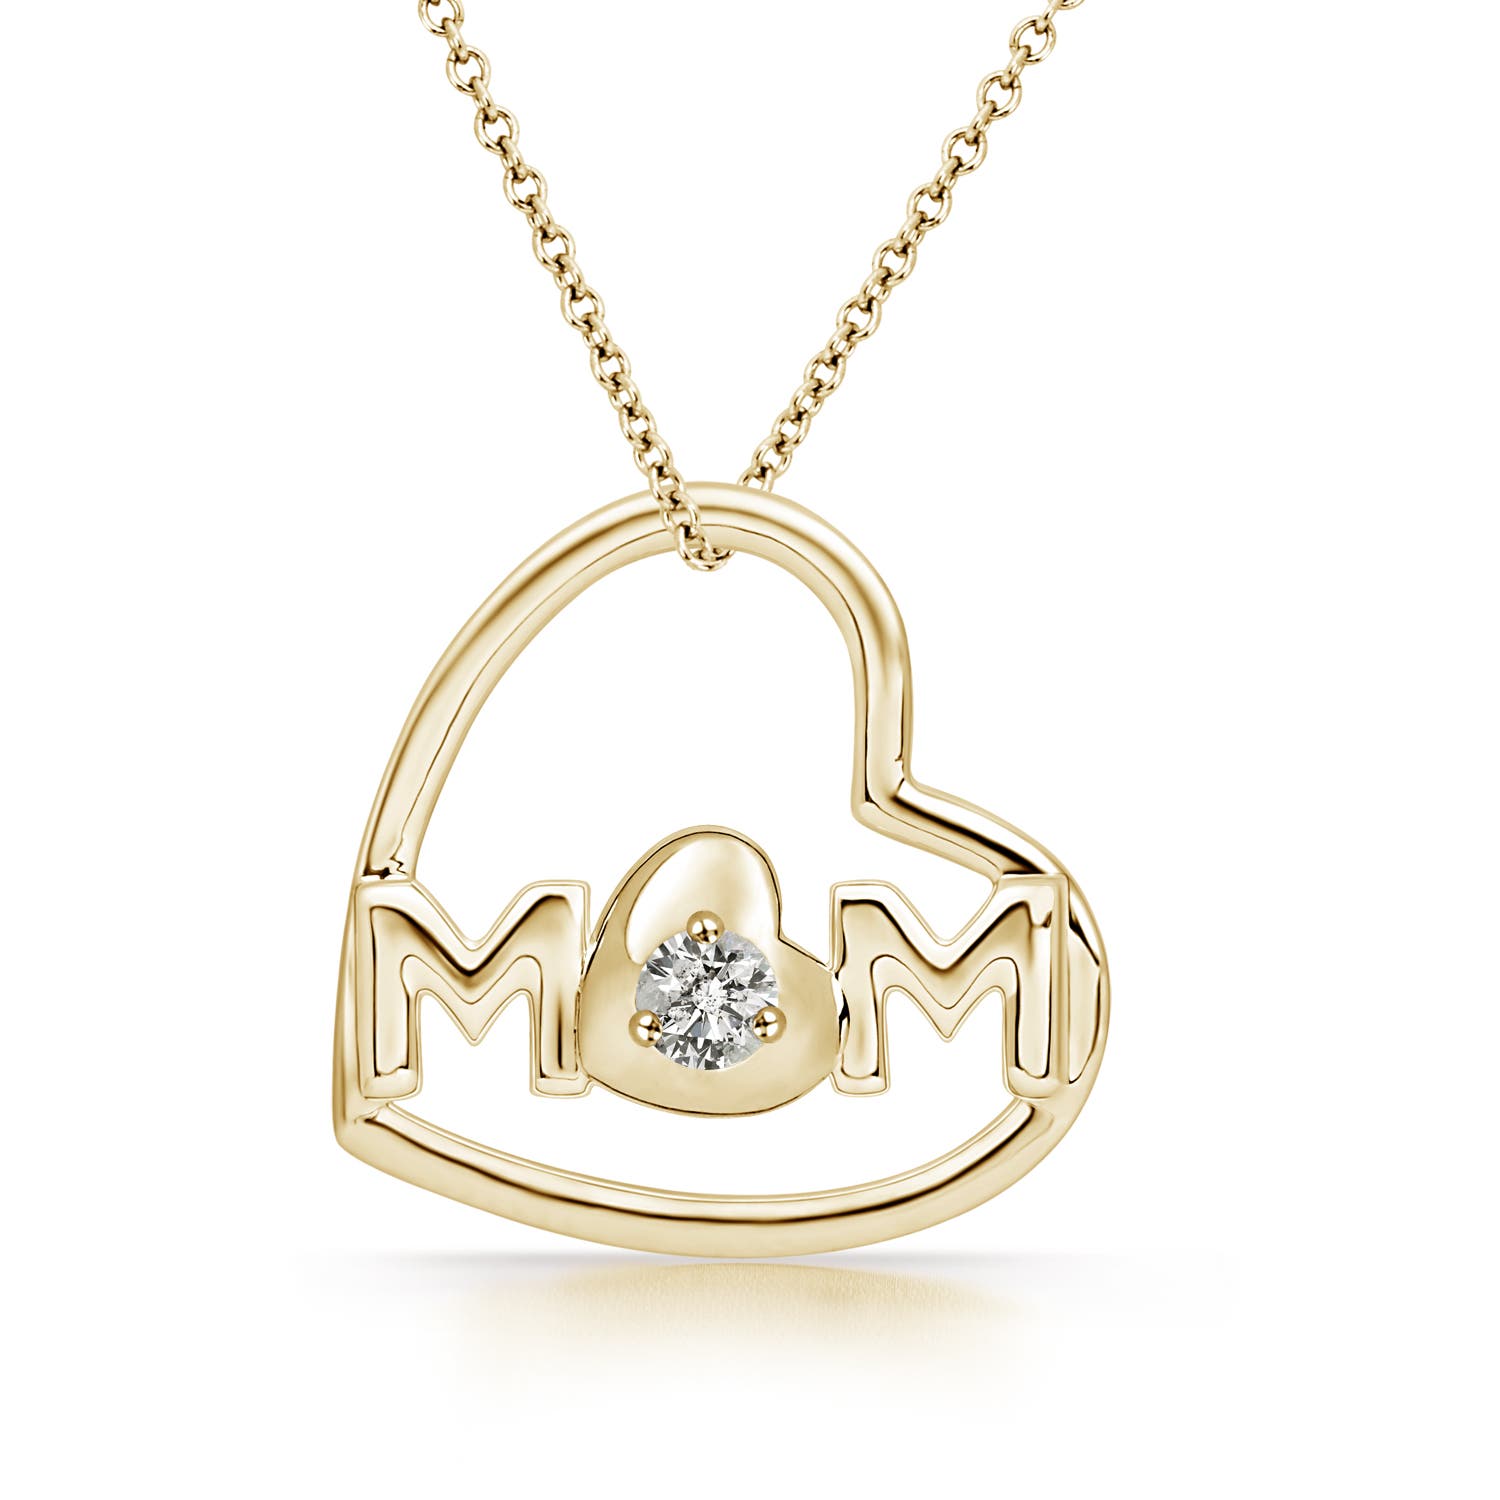 K, I3 / 0.07 CT / 14 KT Yellow Gold